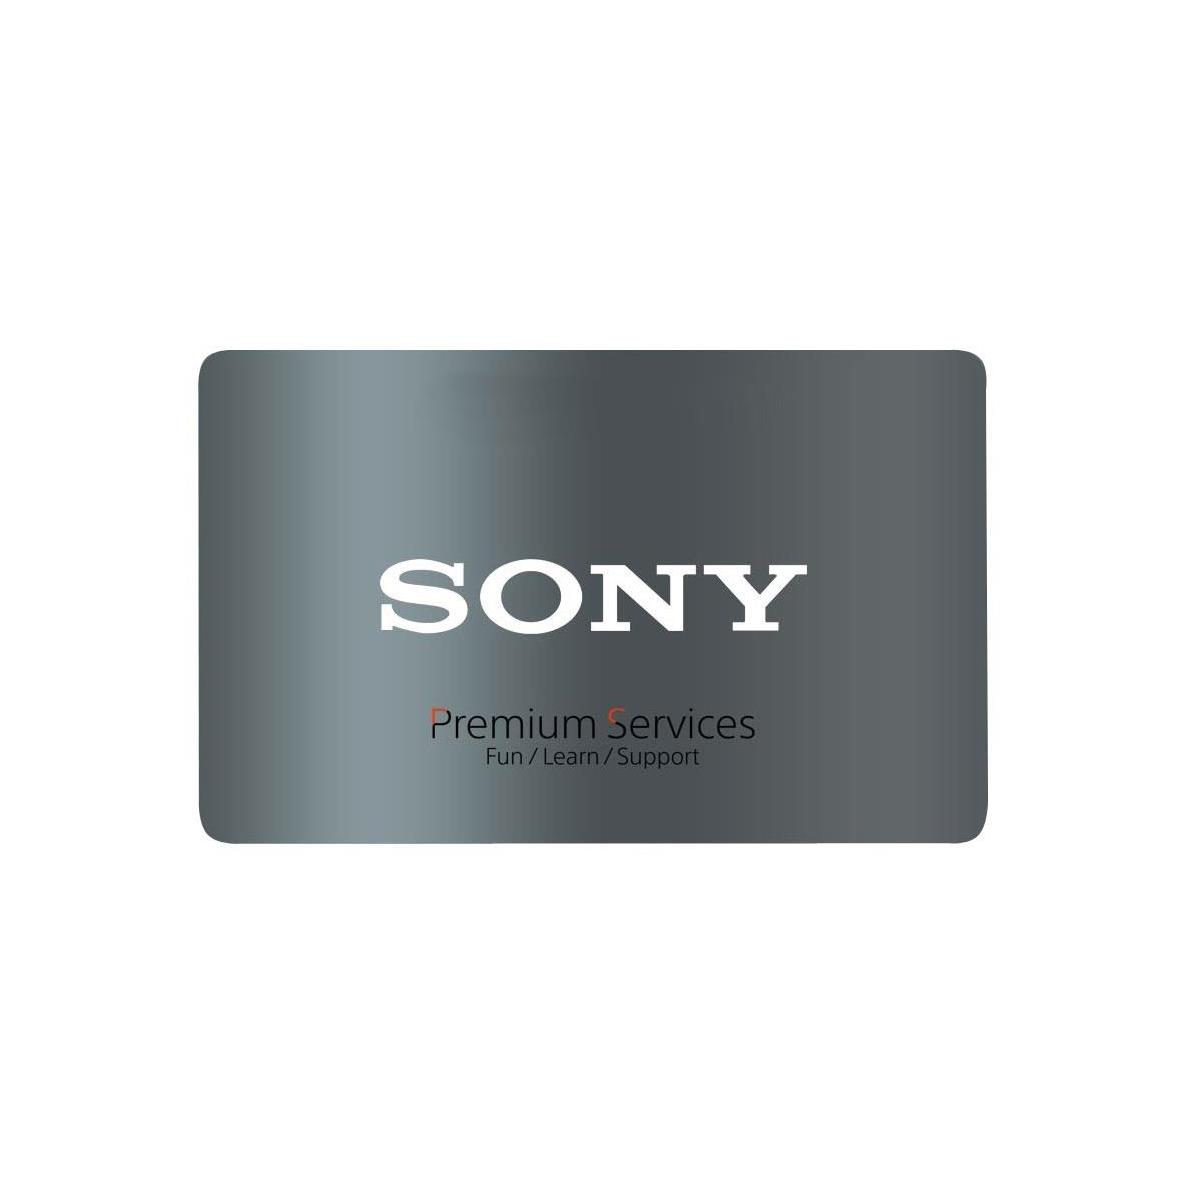 Sony Protect Plus Consumer Warranty for Cameras/Lenses Up To $1500, 2 Year Plan -  1020110921